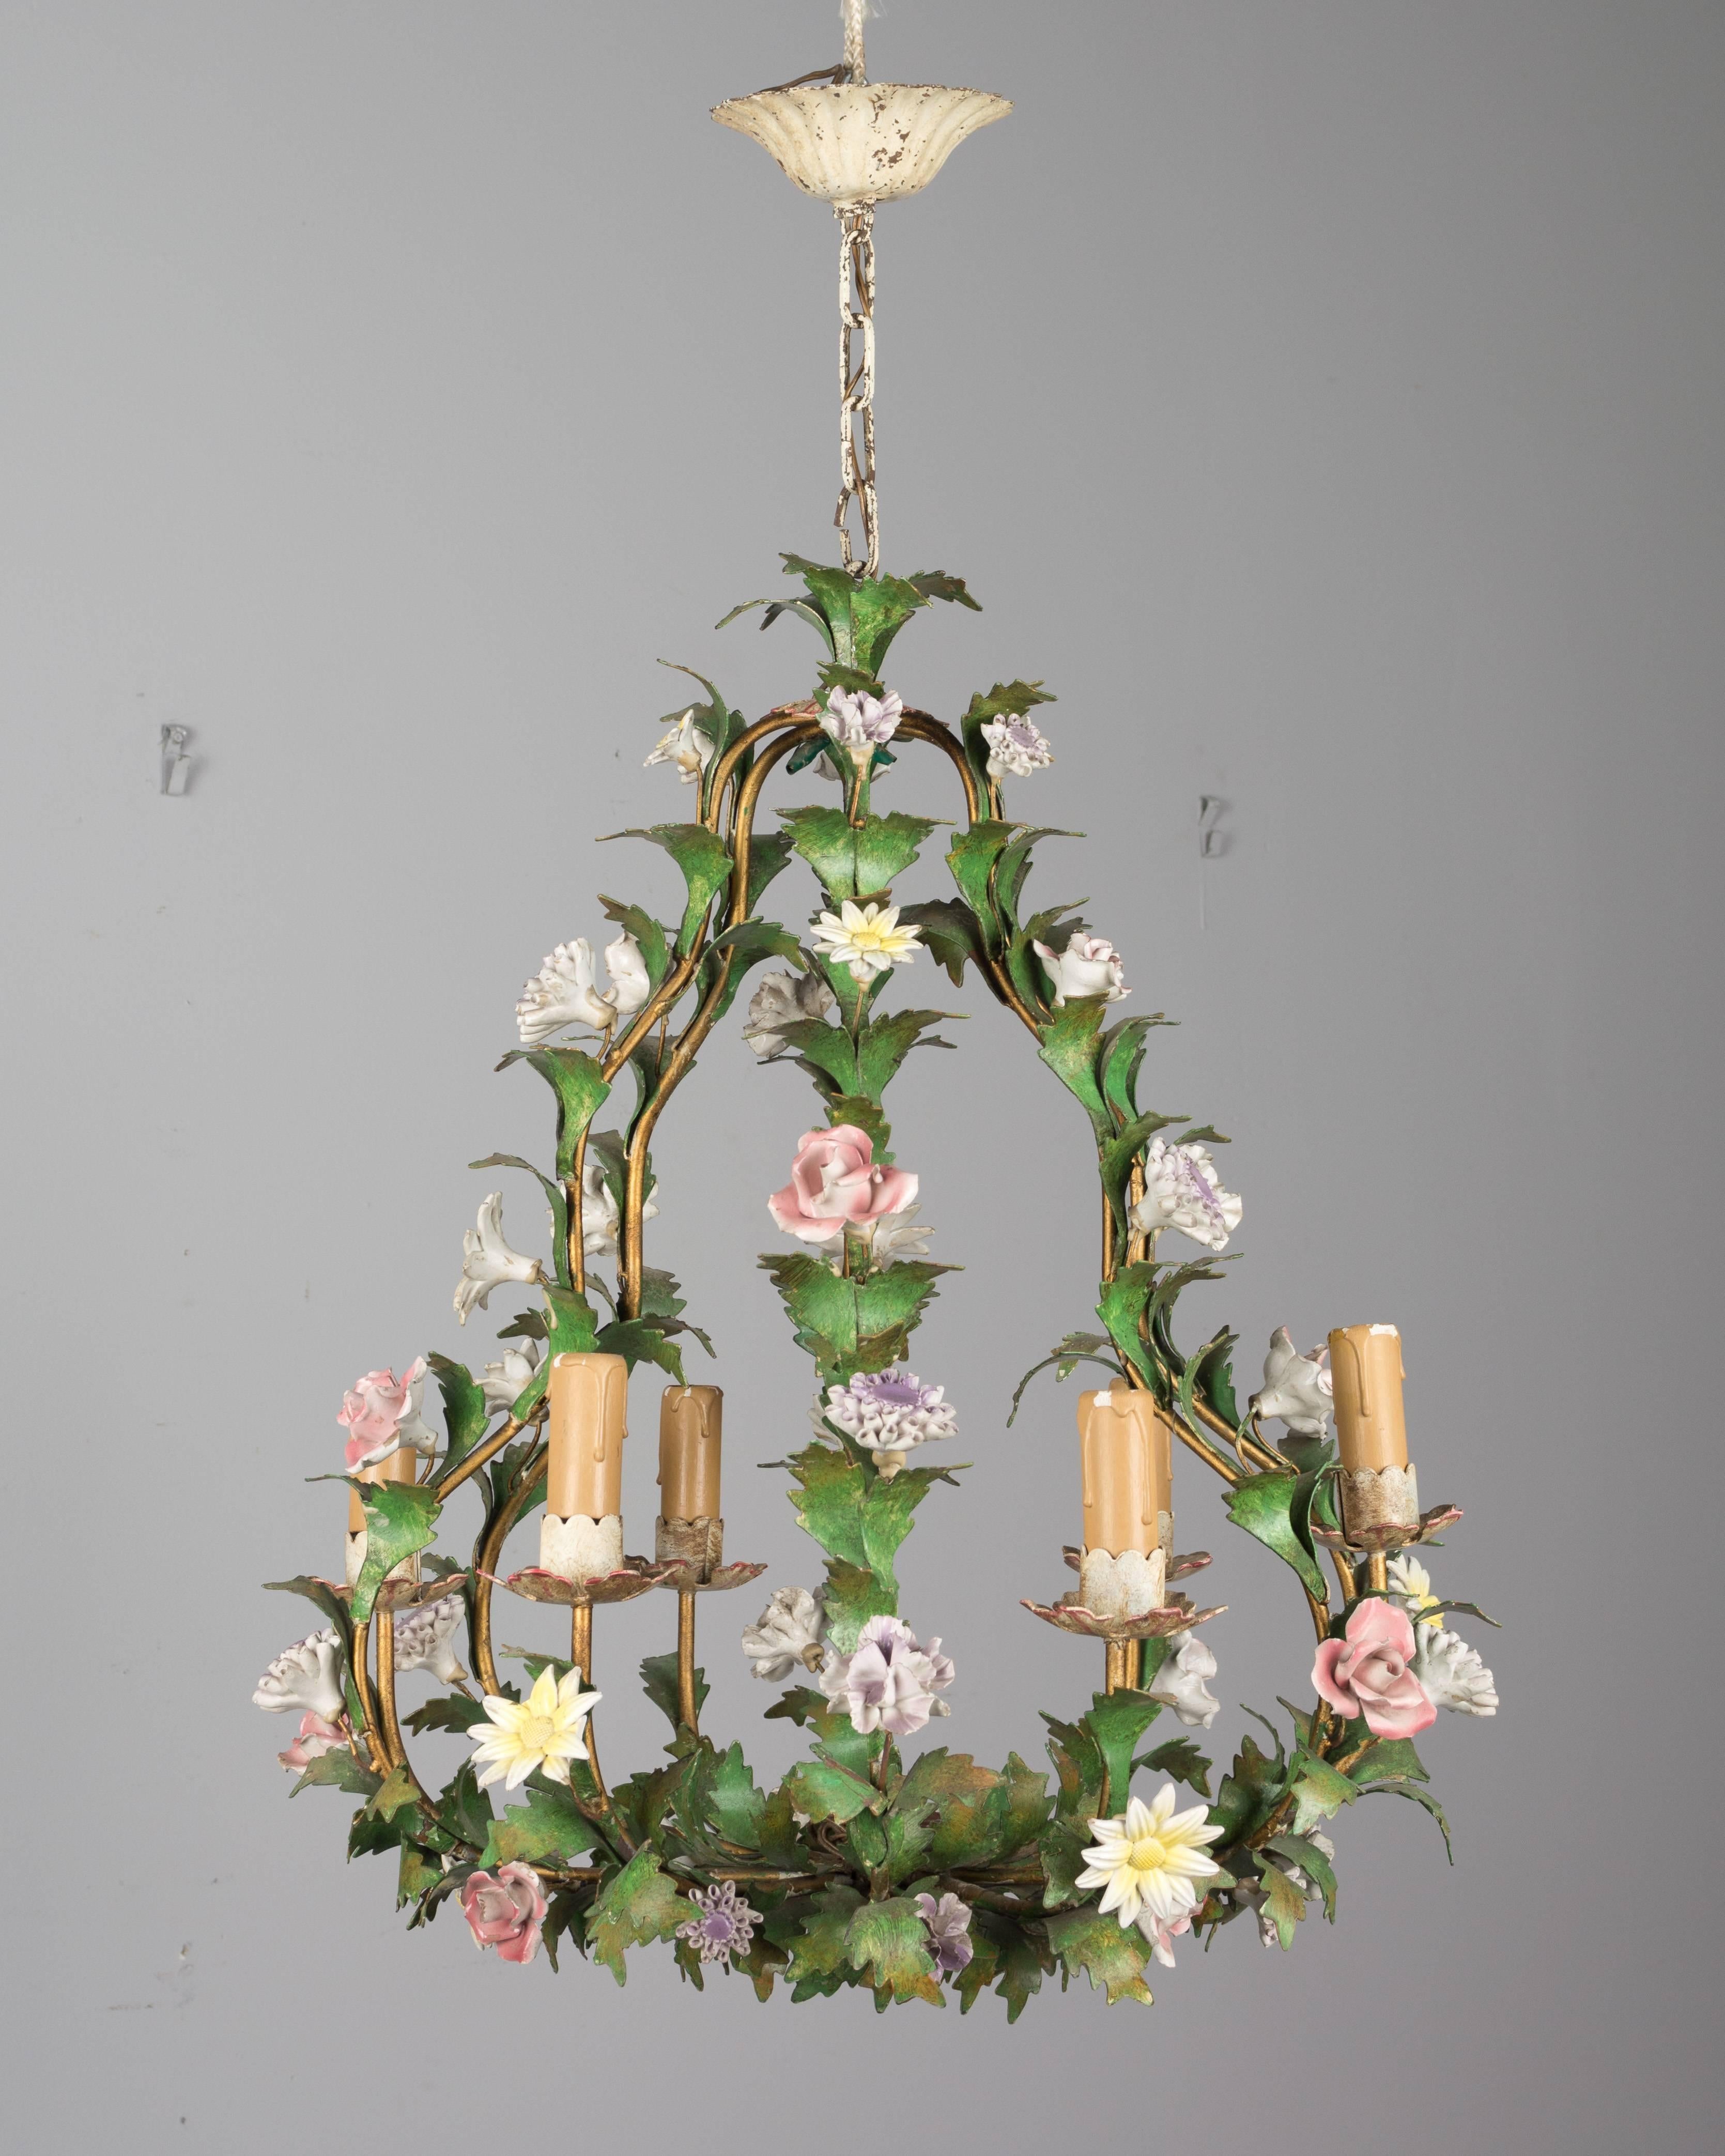 A charming Italian painted tole six-light chandelier with a variety of porcelain flowers including pink roses, yellow daisies and lavender mums, circa 1940-1950. In good condition with vivid color. Chips to some of the porcelain and a small welded